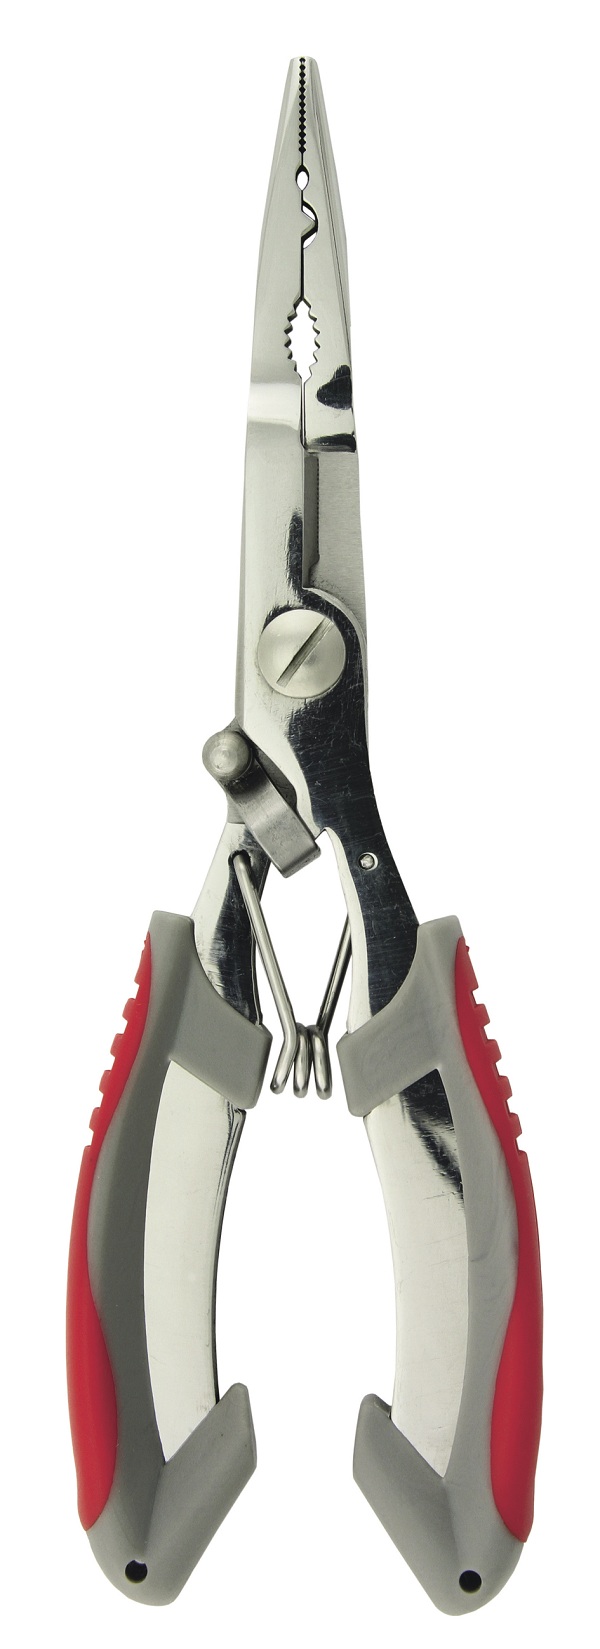 XXX Marine Stainless Steel Fishing Pliers - Long Nose - Online Boating  Store - Boat Parts